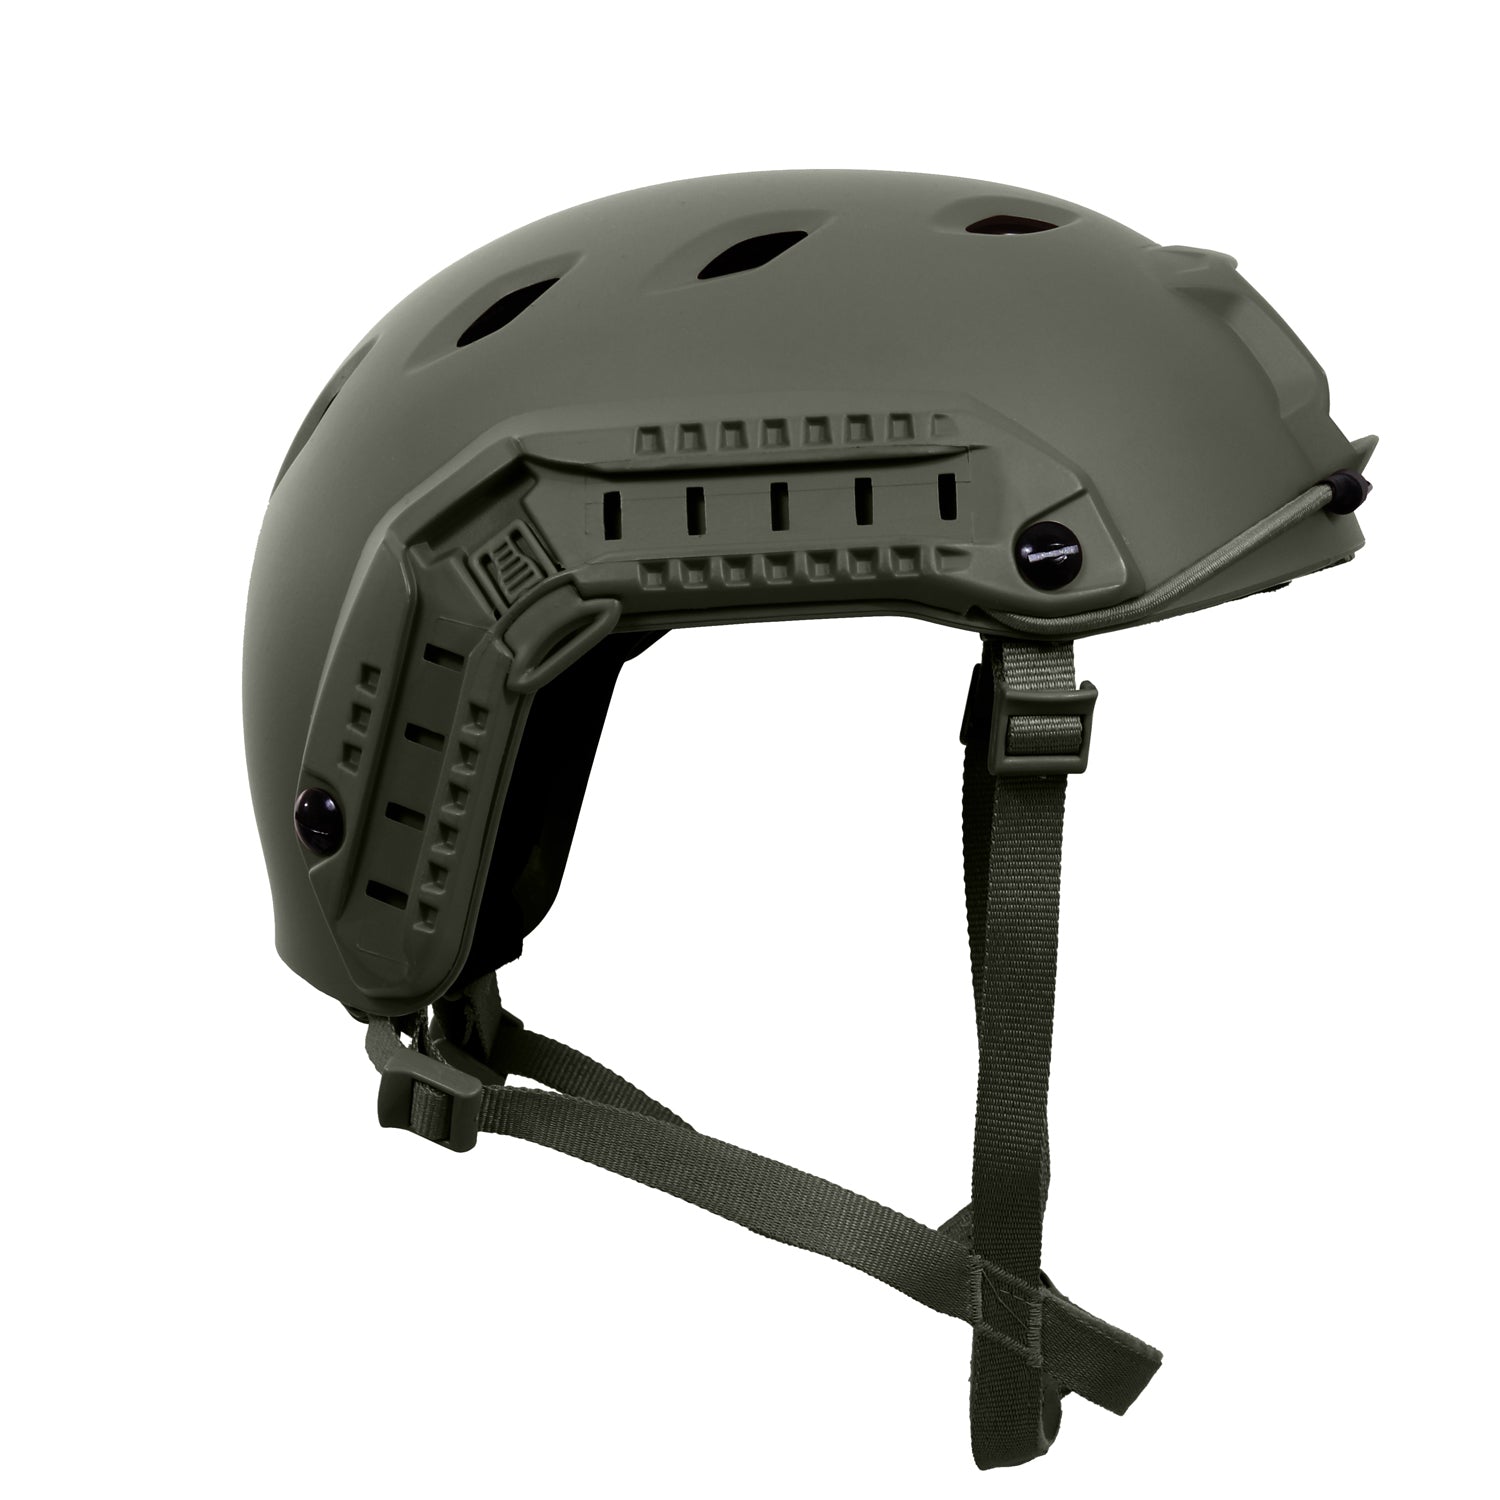 Designed for the tactical enthusiast, Rothco’s Advanced Tactical Adjustable Airsoft Helmet is the perfect addition to any airsoft loadout or non-ballistic tactical training exercise. The Lightweight design decreases head and neck fatigue while supporting optics, video recording devices, and flashlights. 